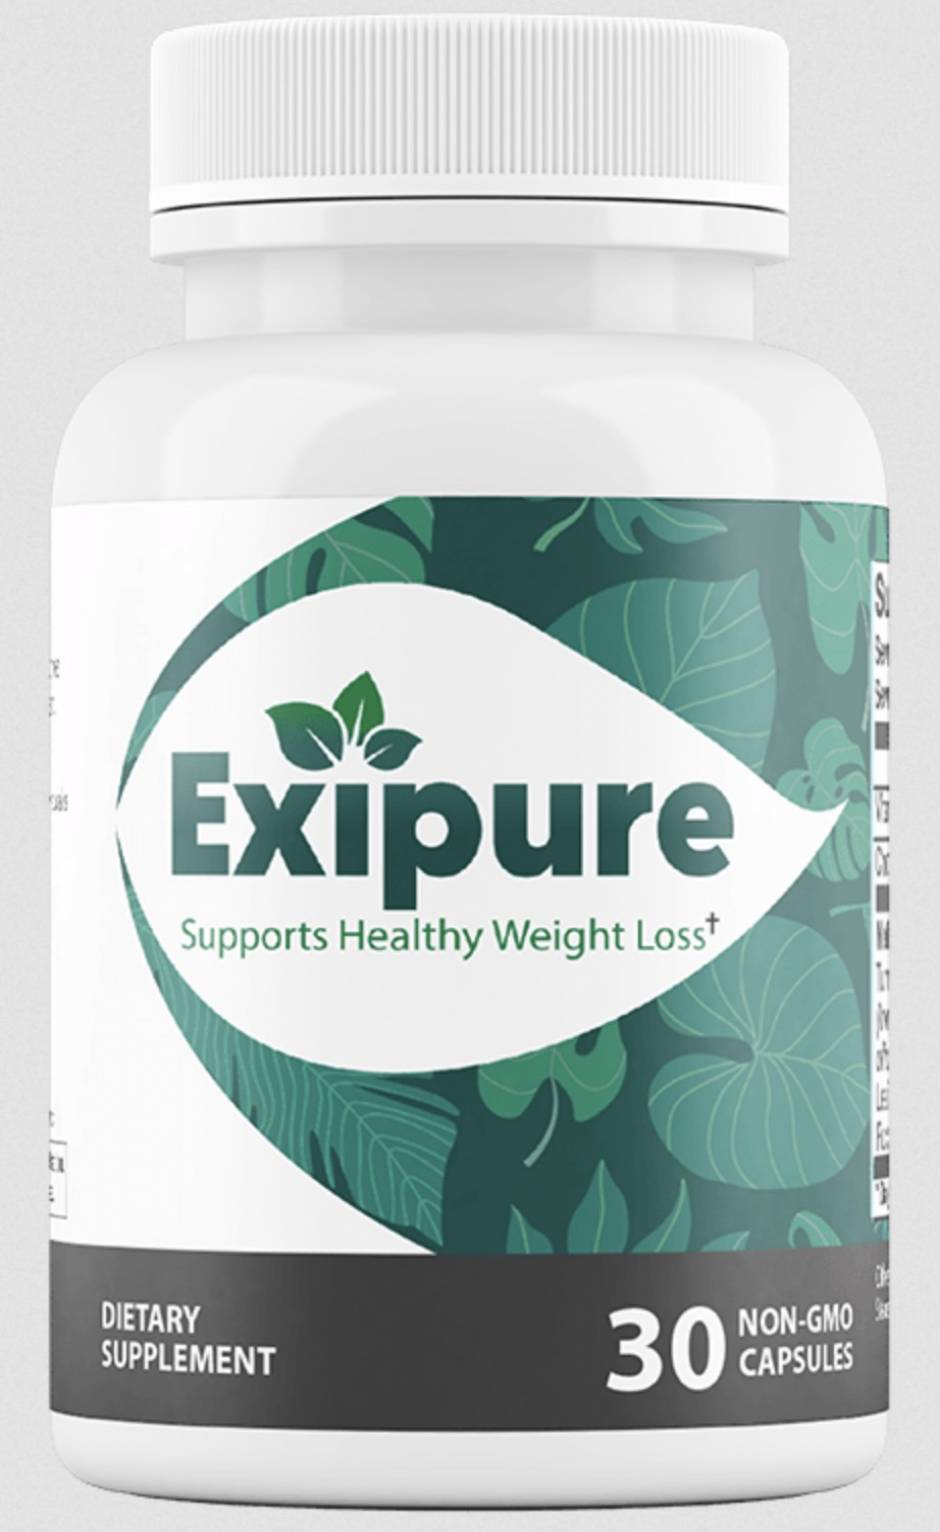 Exipure Reviews From Customers